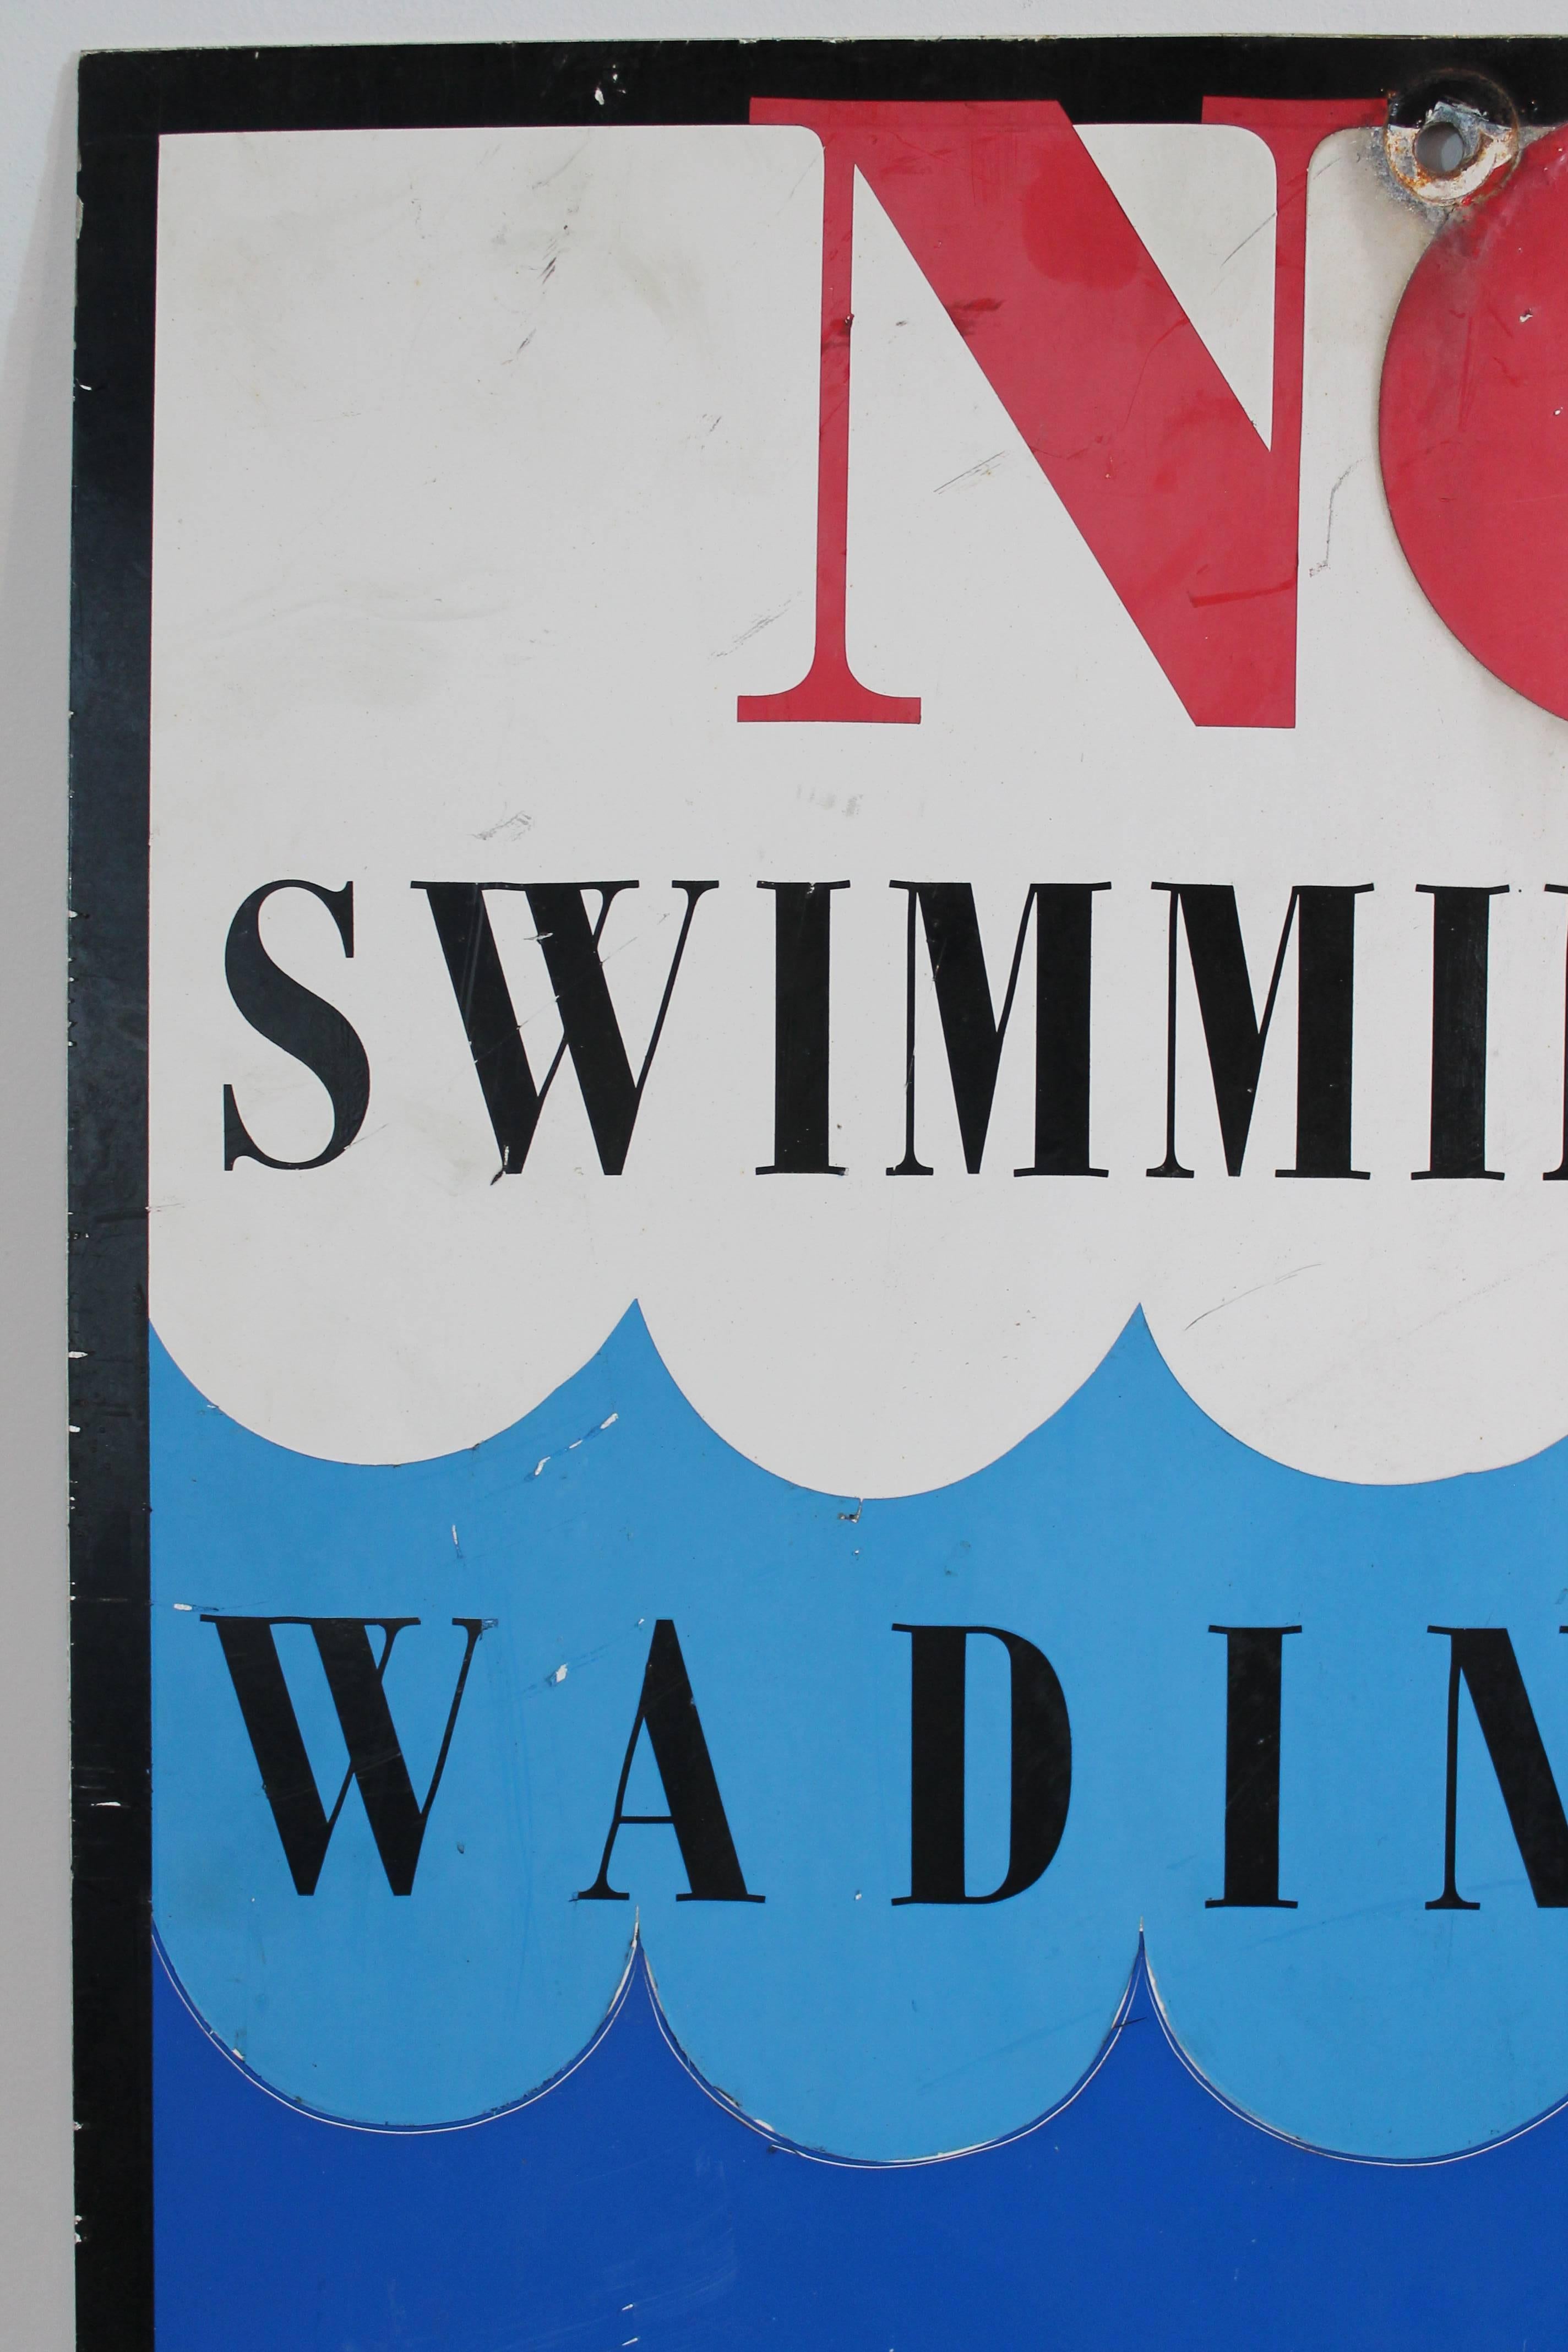 Great graphic metal park sign from the mid-20th century.
No swimming. No wading. No fishing.
Great surface.